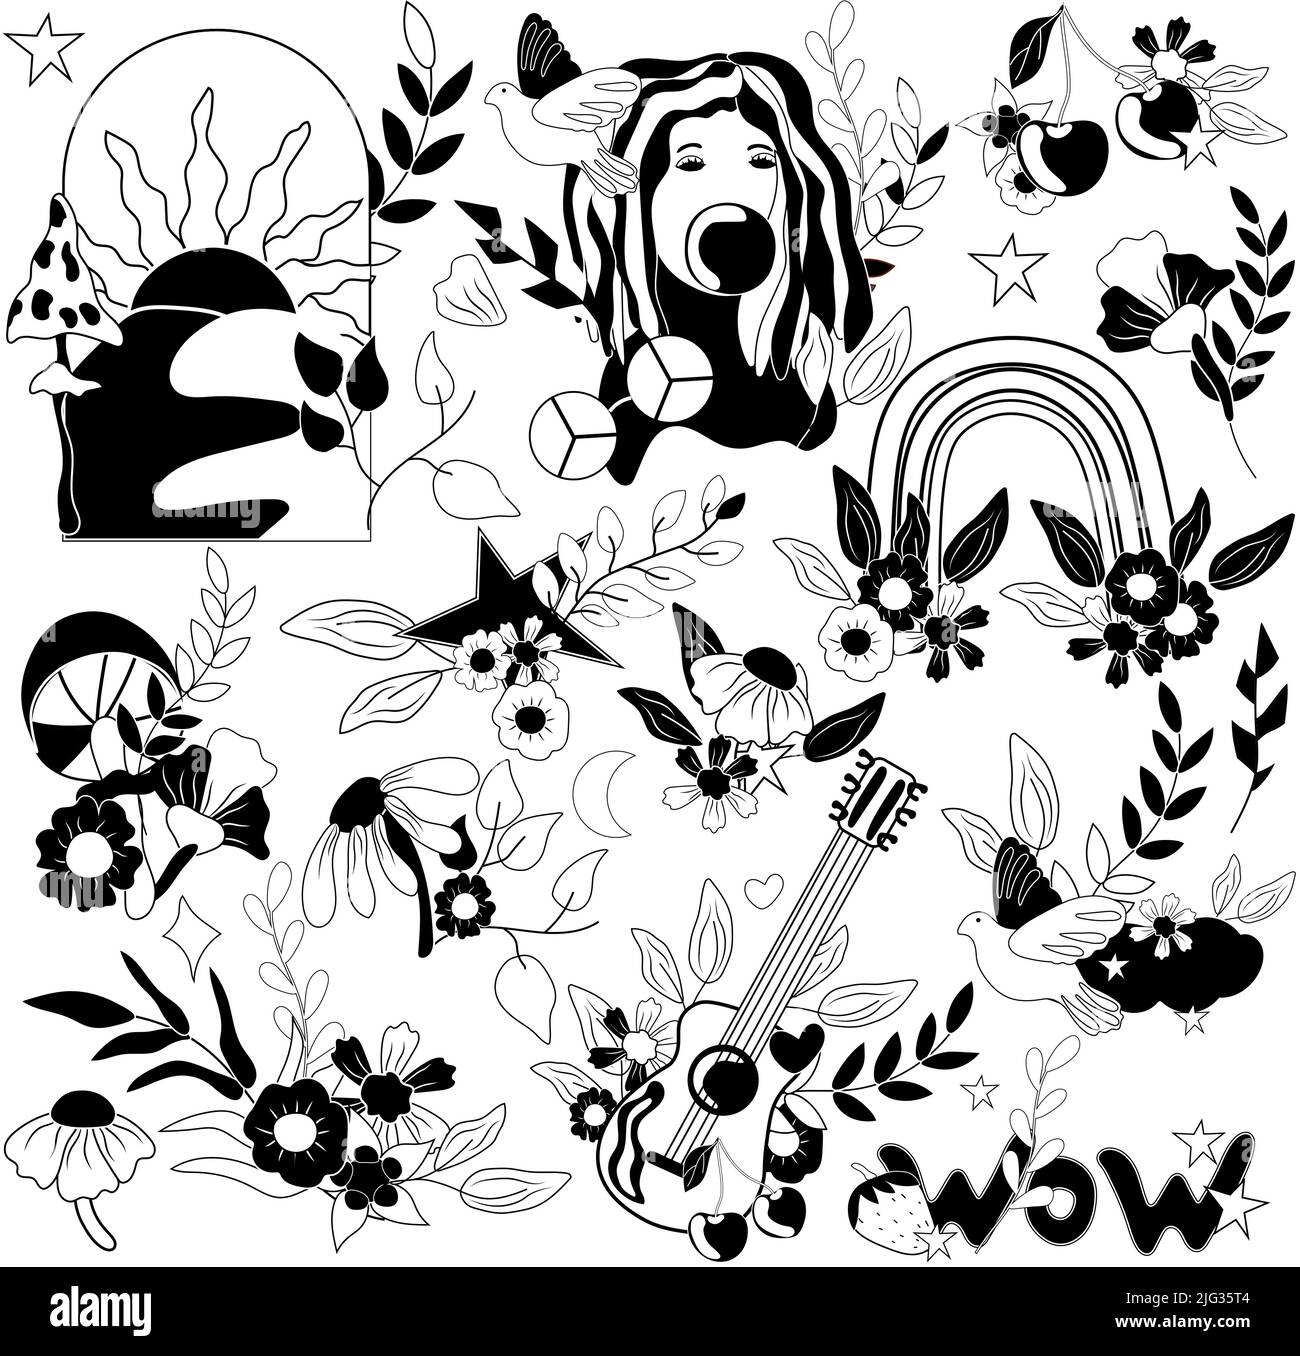 70s Black and white groovy element, Retro girl, sun, flowers, leaves, mushroom, bird, rainbows and lettering. Cute compositions in vintage hippy style. Vector illustration. Stock Vector